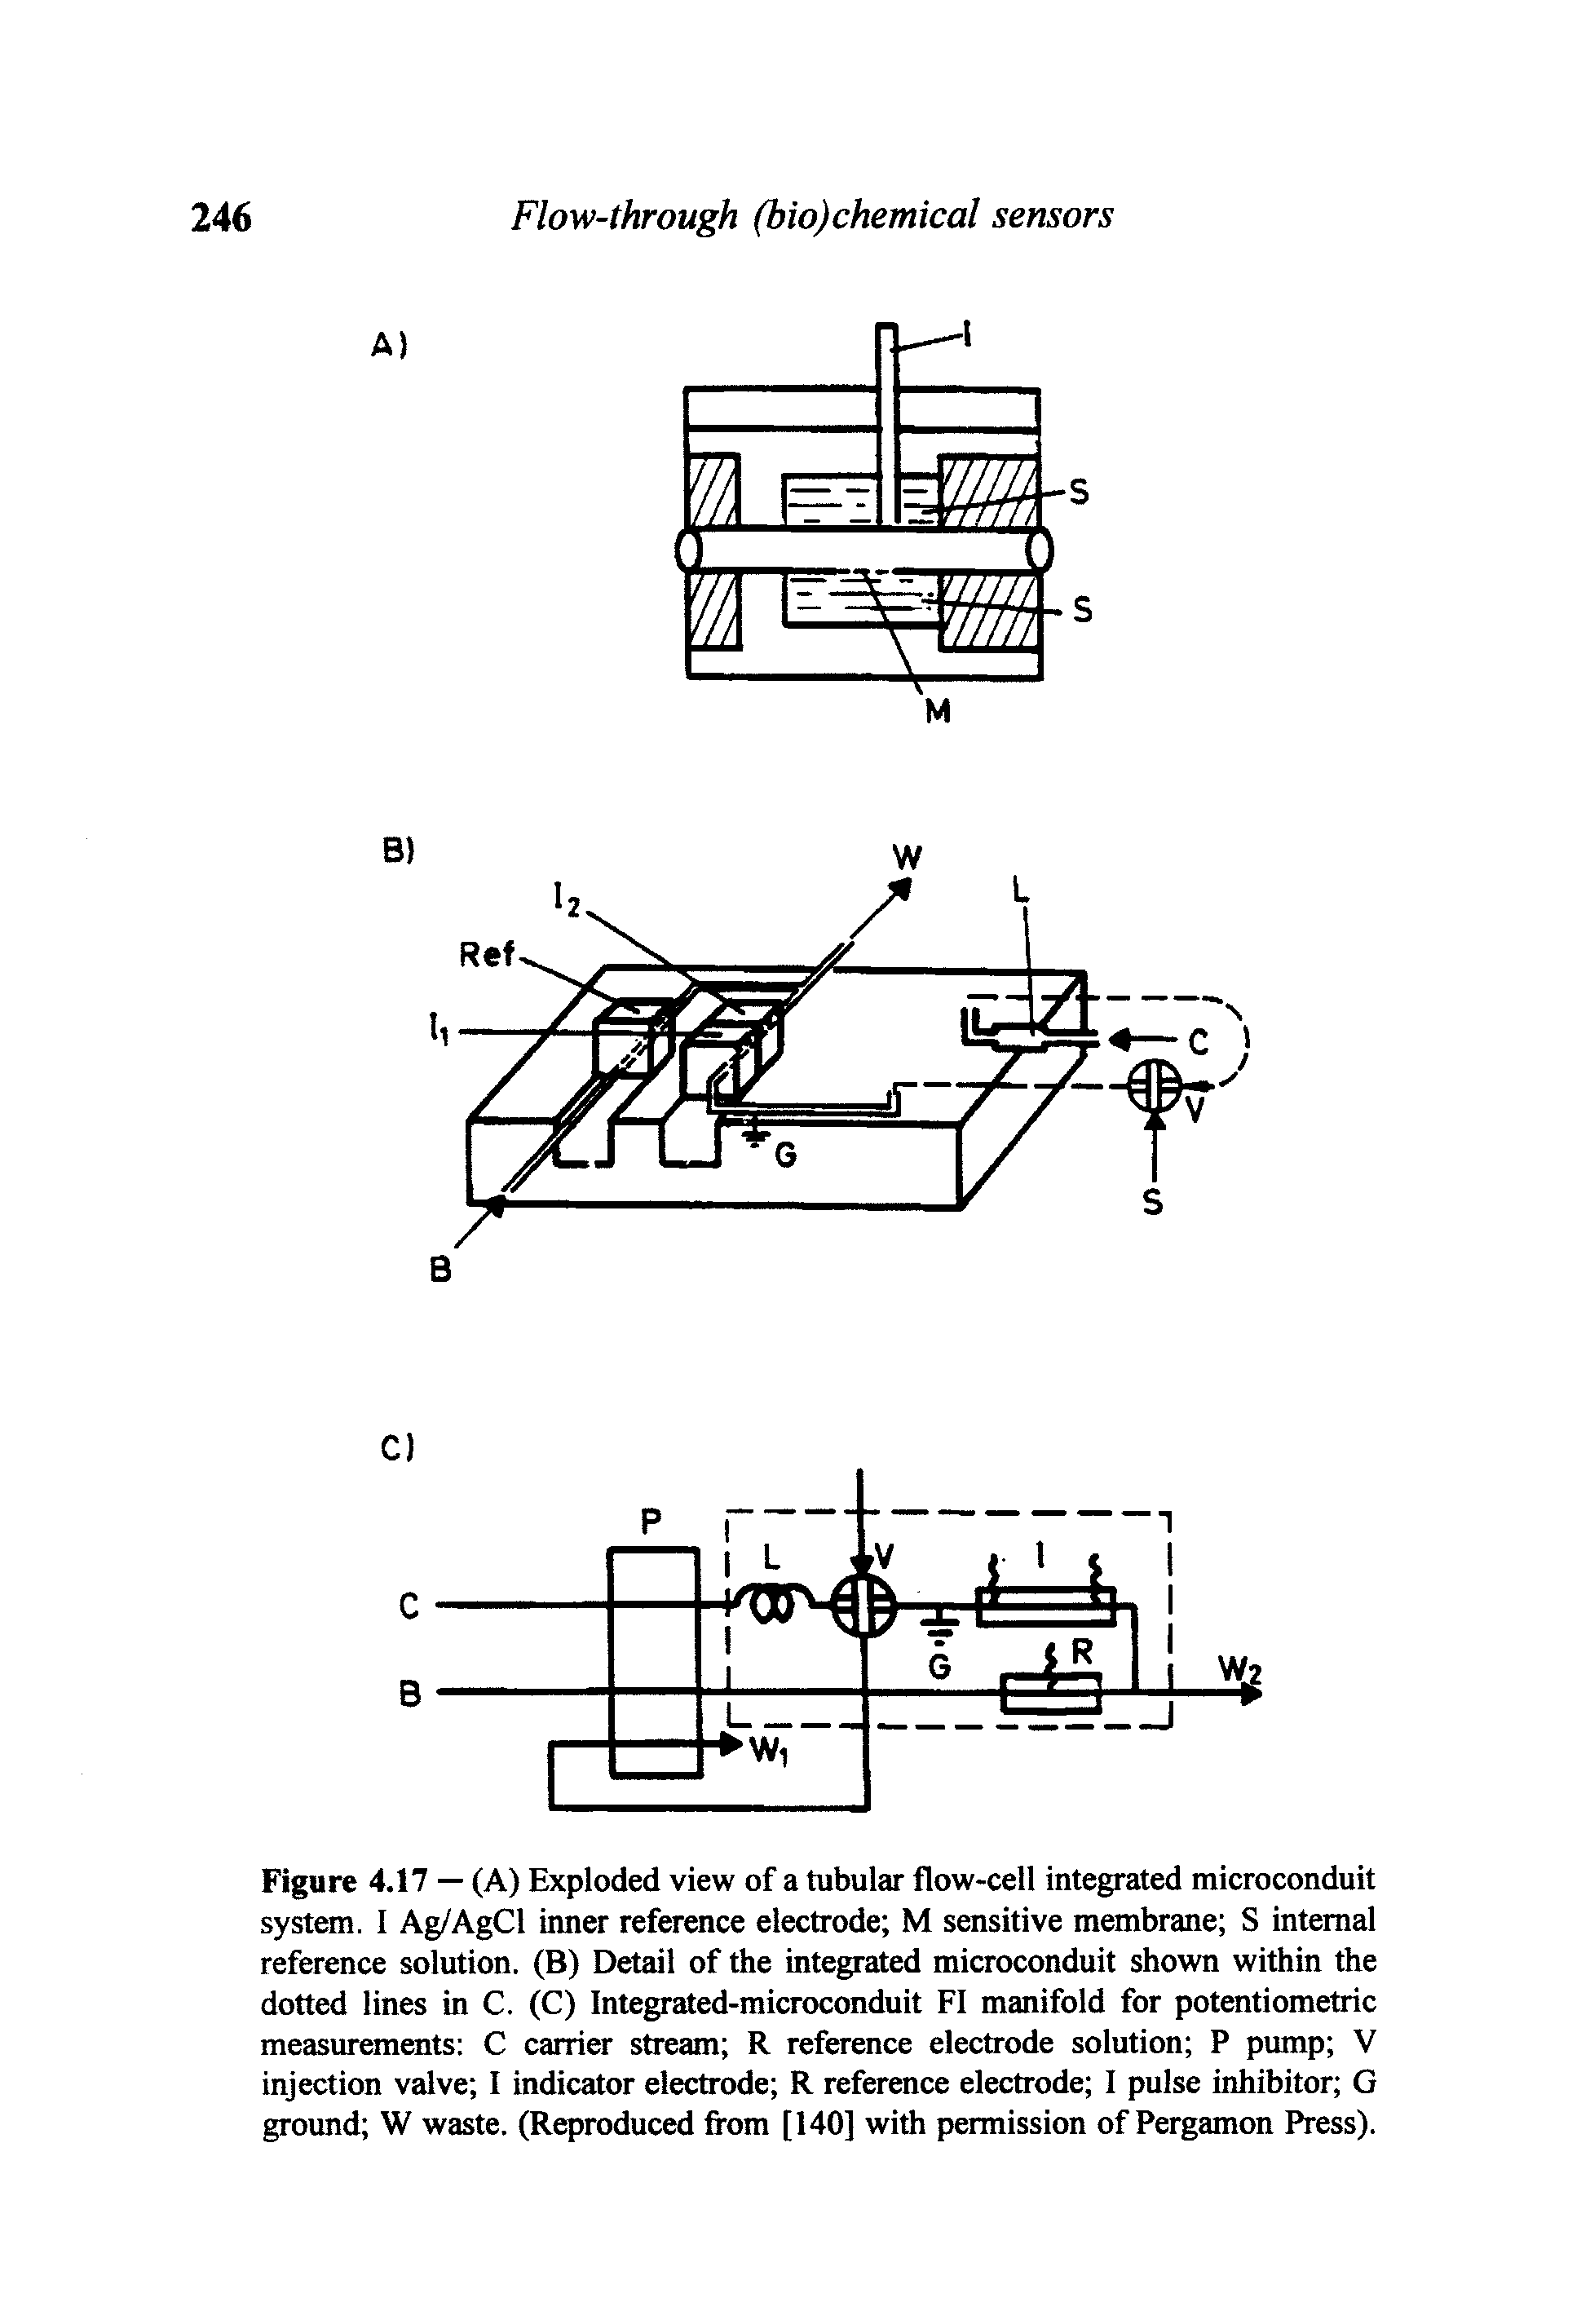 Figure 4.17 — (A) Exploded view of a tubular flow-cell integrated microconduit system. I Ag/AgCl inner reference electrode M sensitive membrane S internal reference solution. (B) Detail of the integrated microconduit shown within the dotted lines in C. (C) Integrated-microconduit FI manifold for potentiometric measurements C carrier stream R reference electrode solution P pump V injection valve I indicator electrode R reference electrode I pulse inhibitor G ground W waste. (Reproduced from [140] with permission of Pergamon Press).